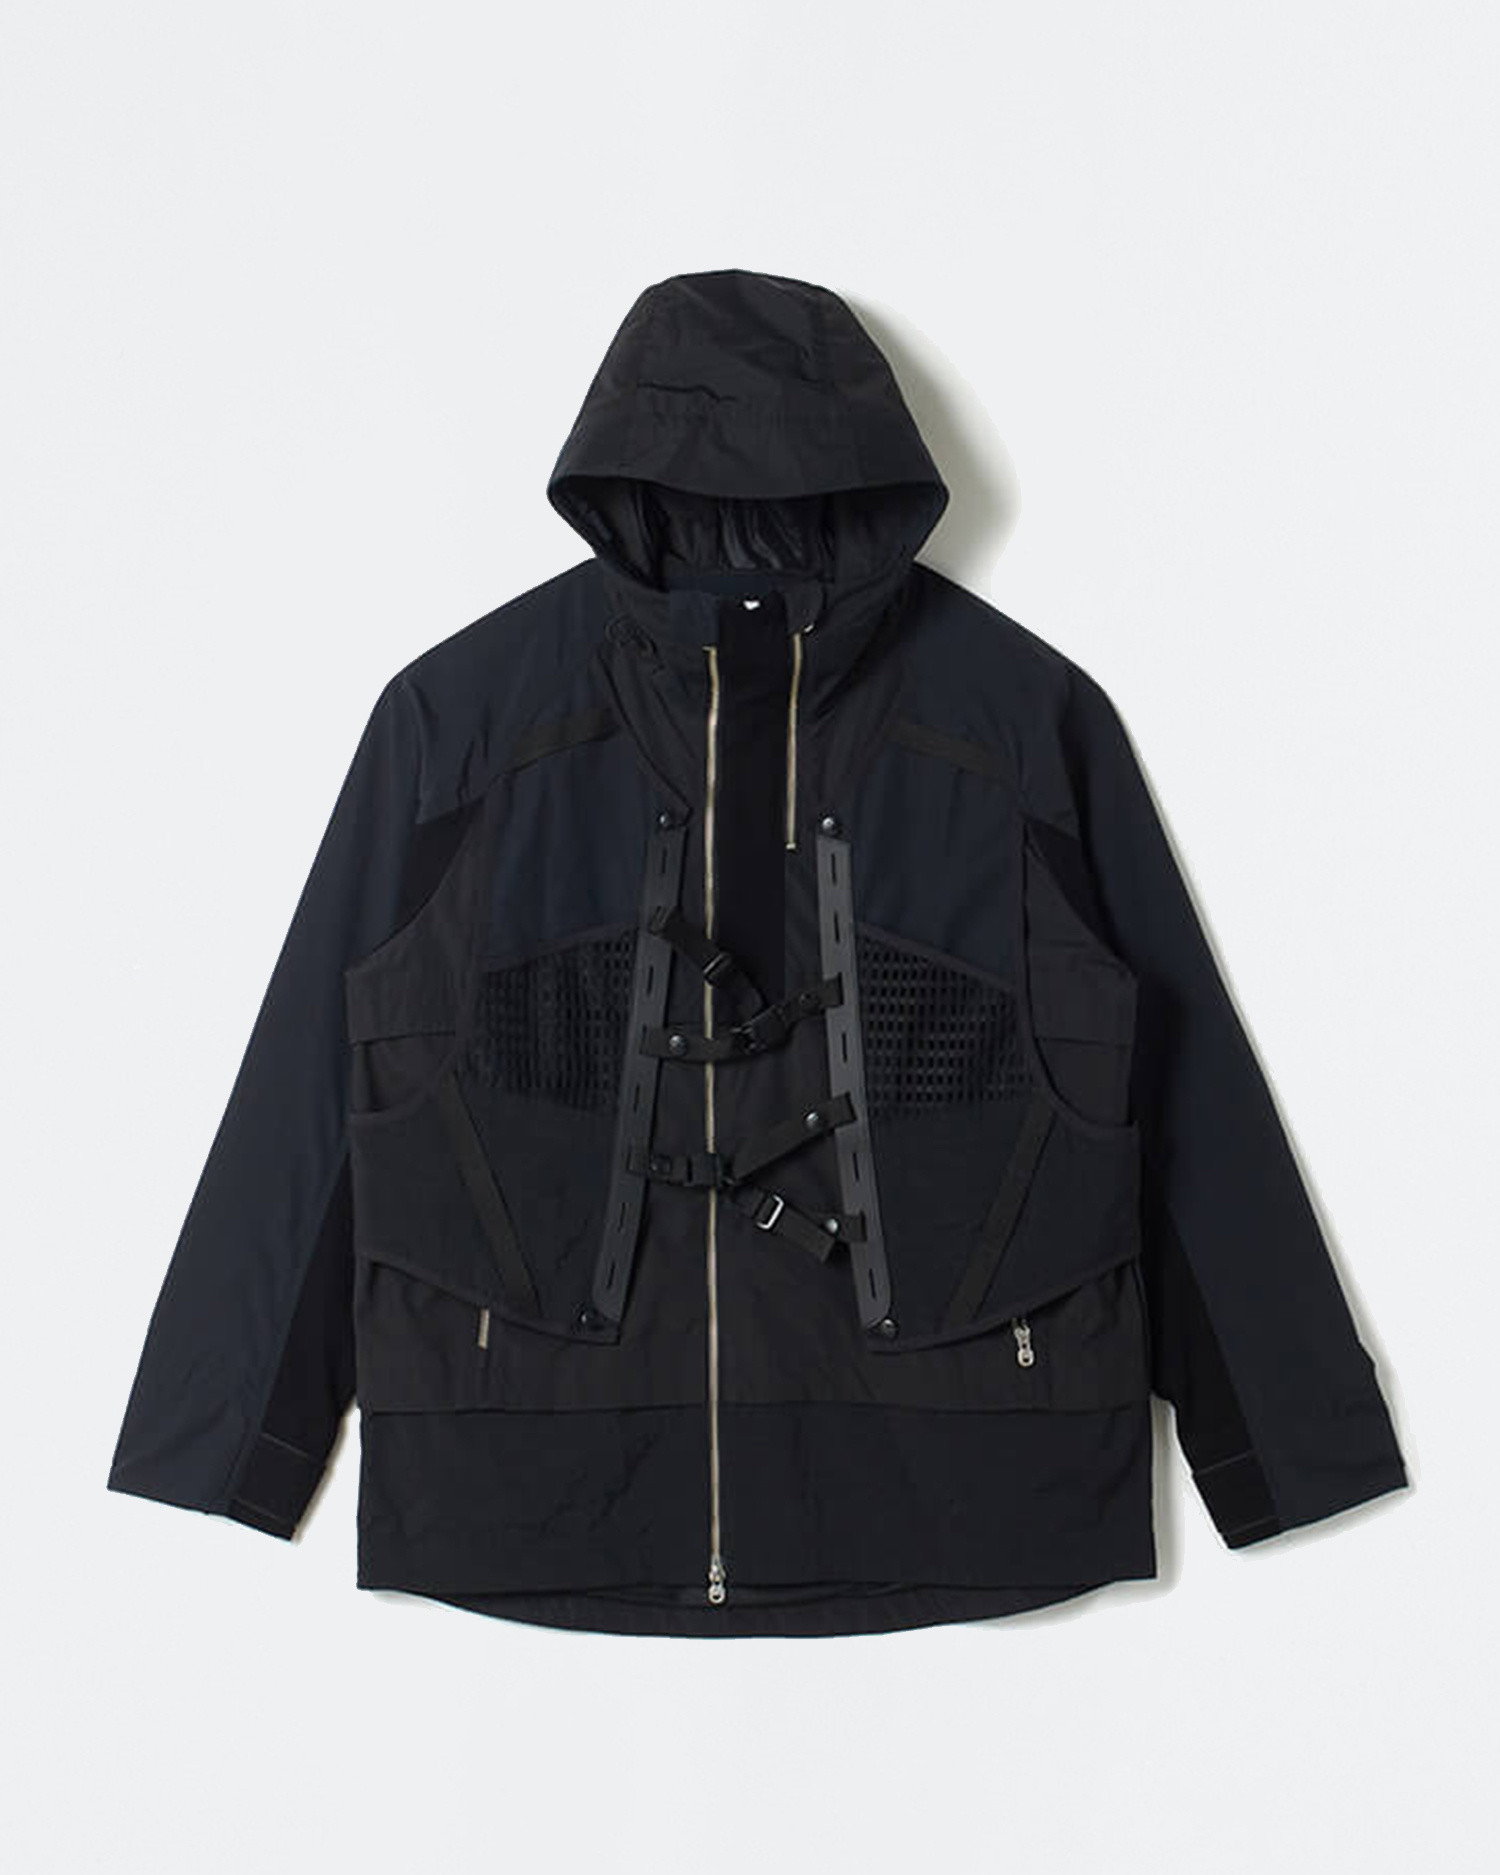 White Mountaineering Layered Hooded 